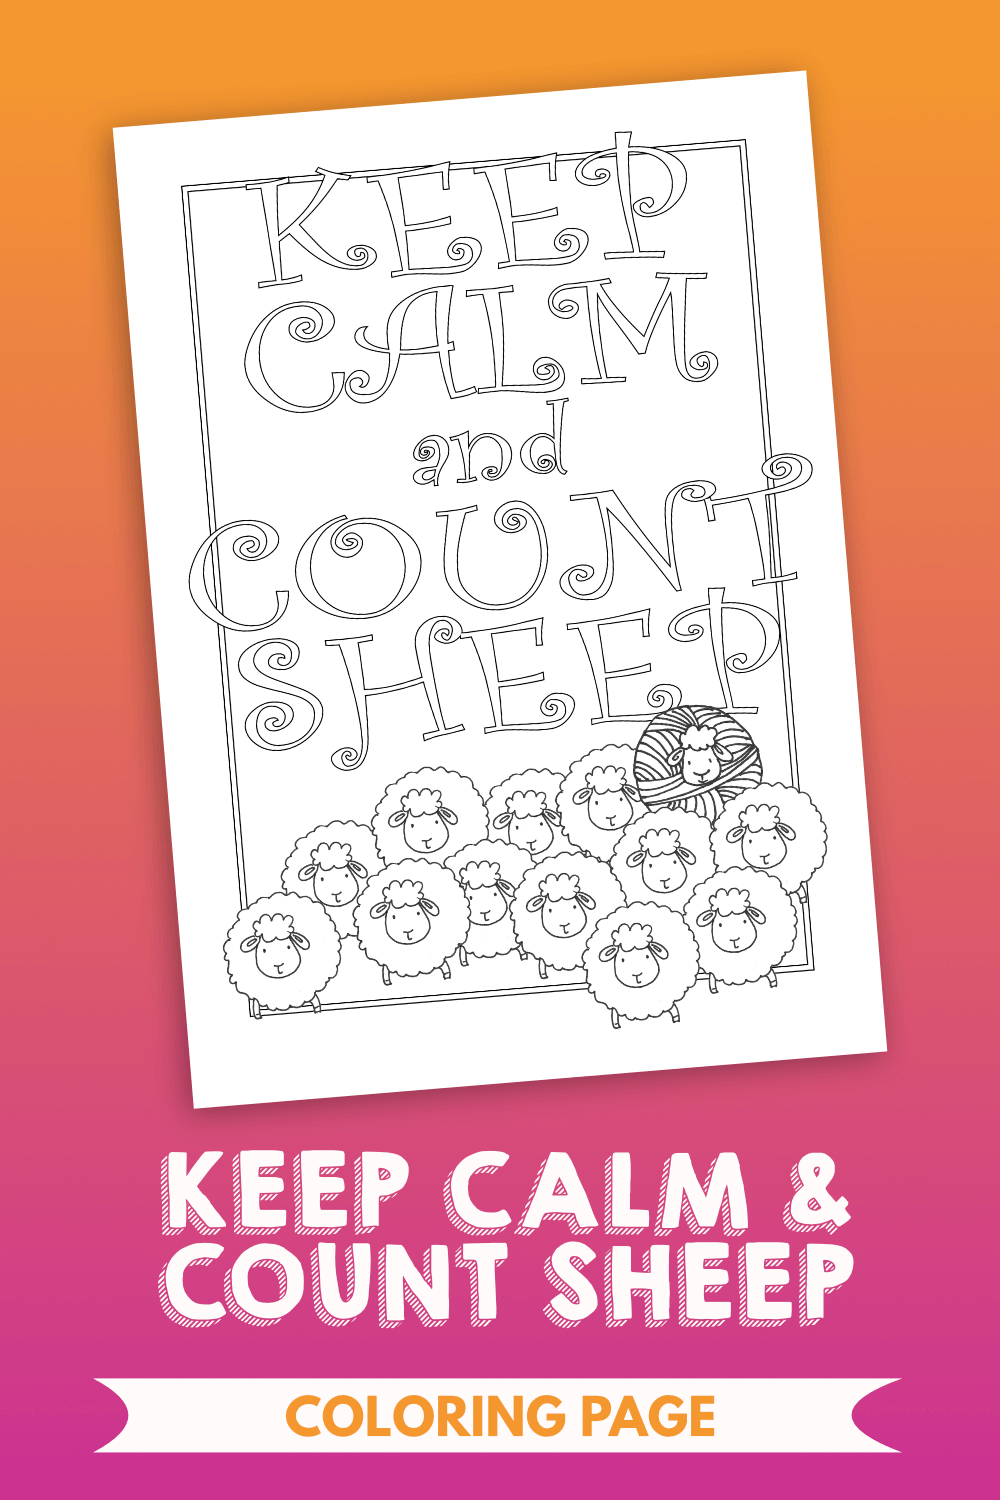 Keep calm and count sheep free printable coloring page